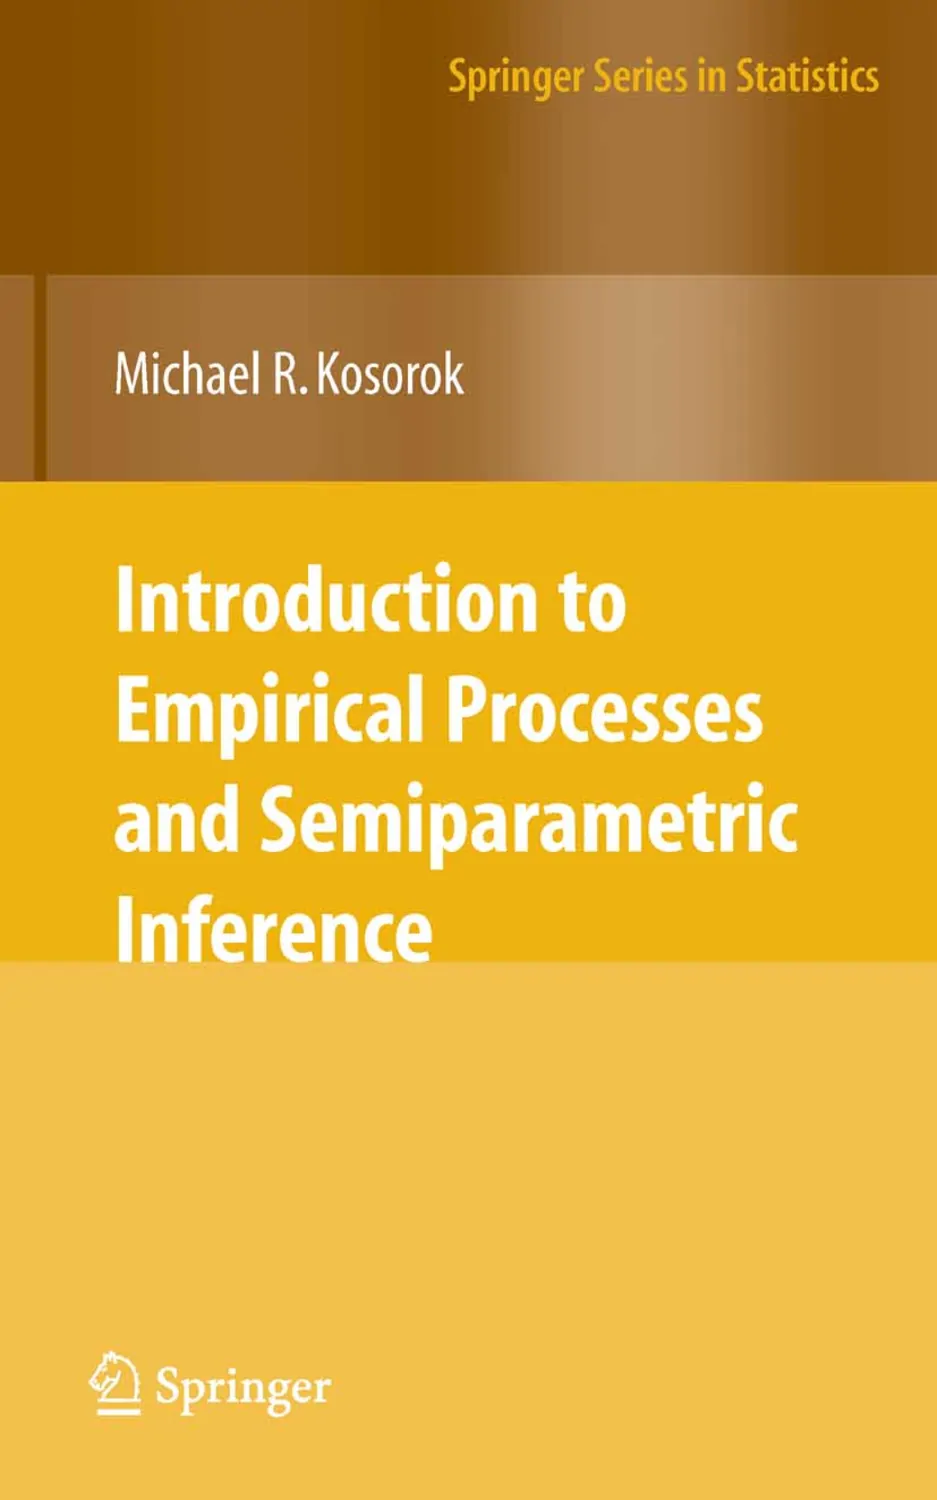 Introduction To Empirical Processes And Semiparametric Inference